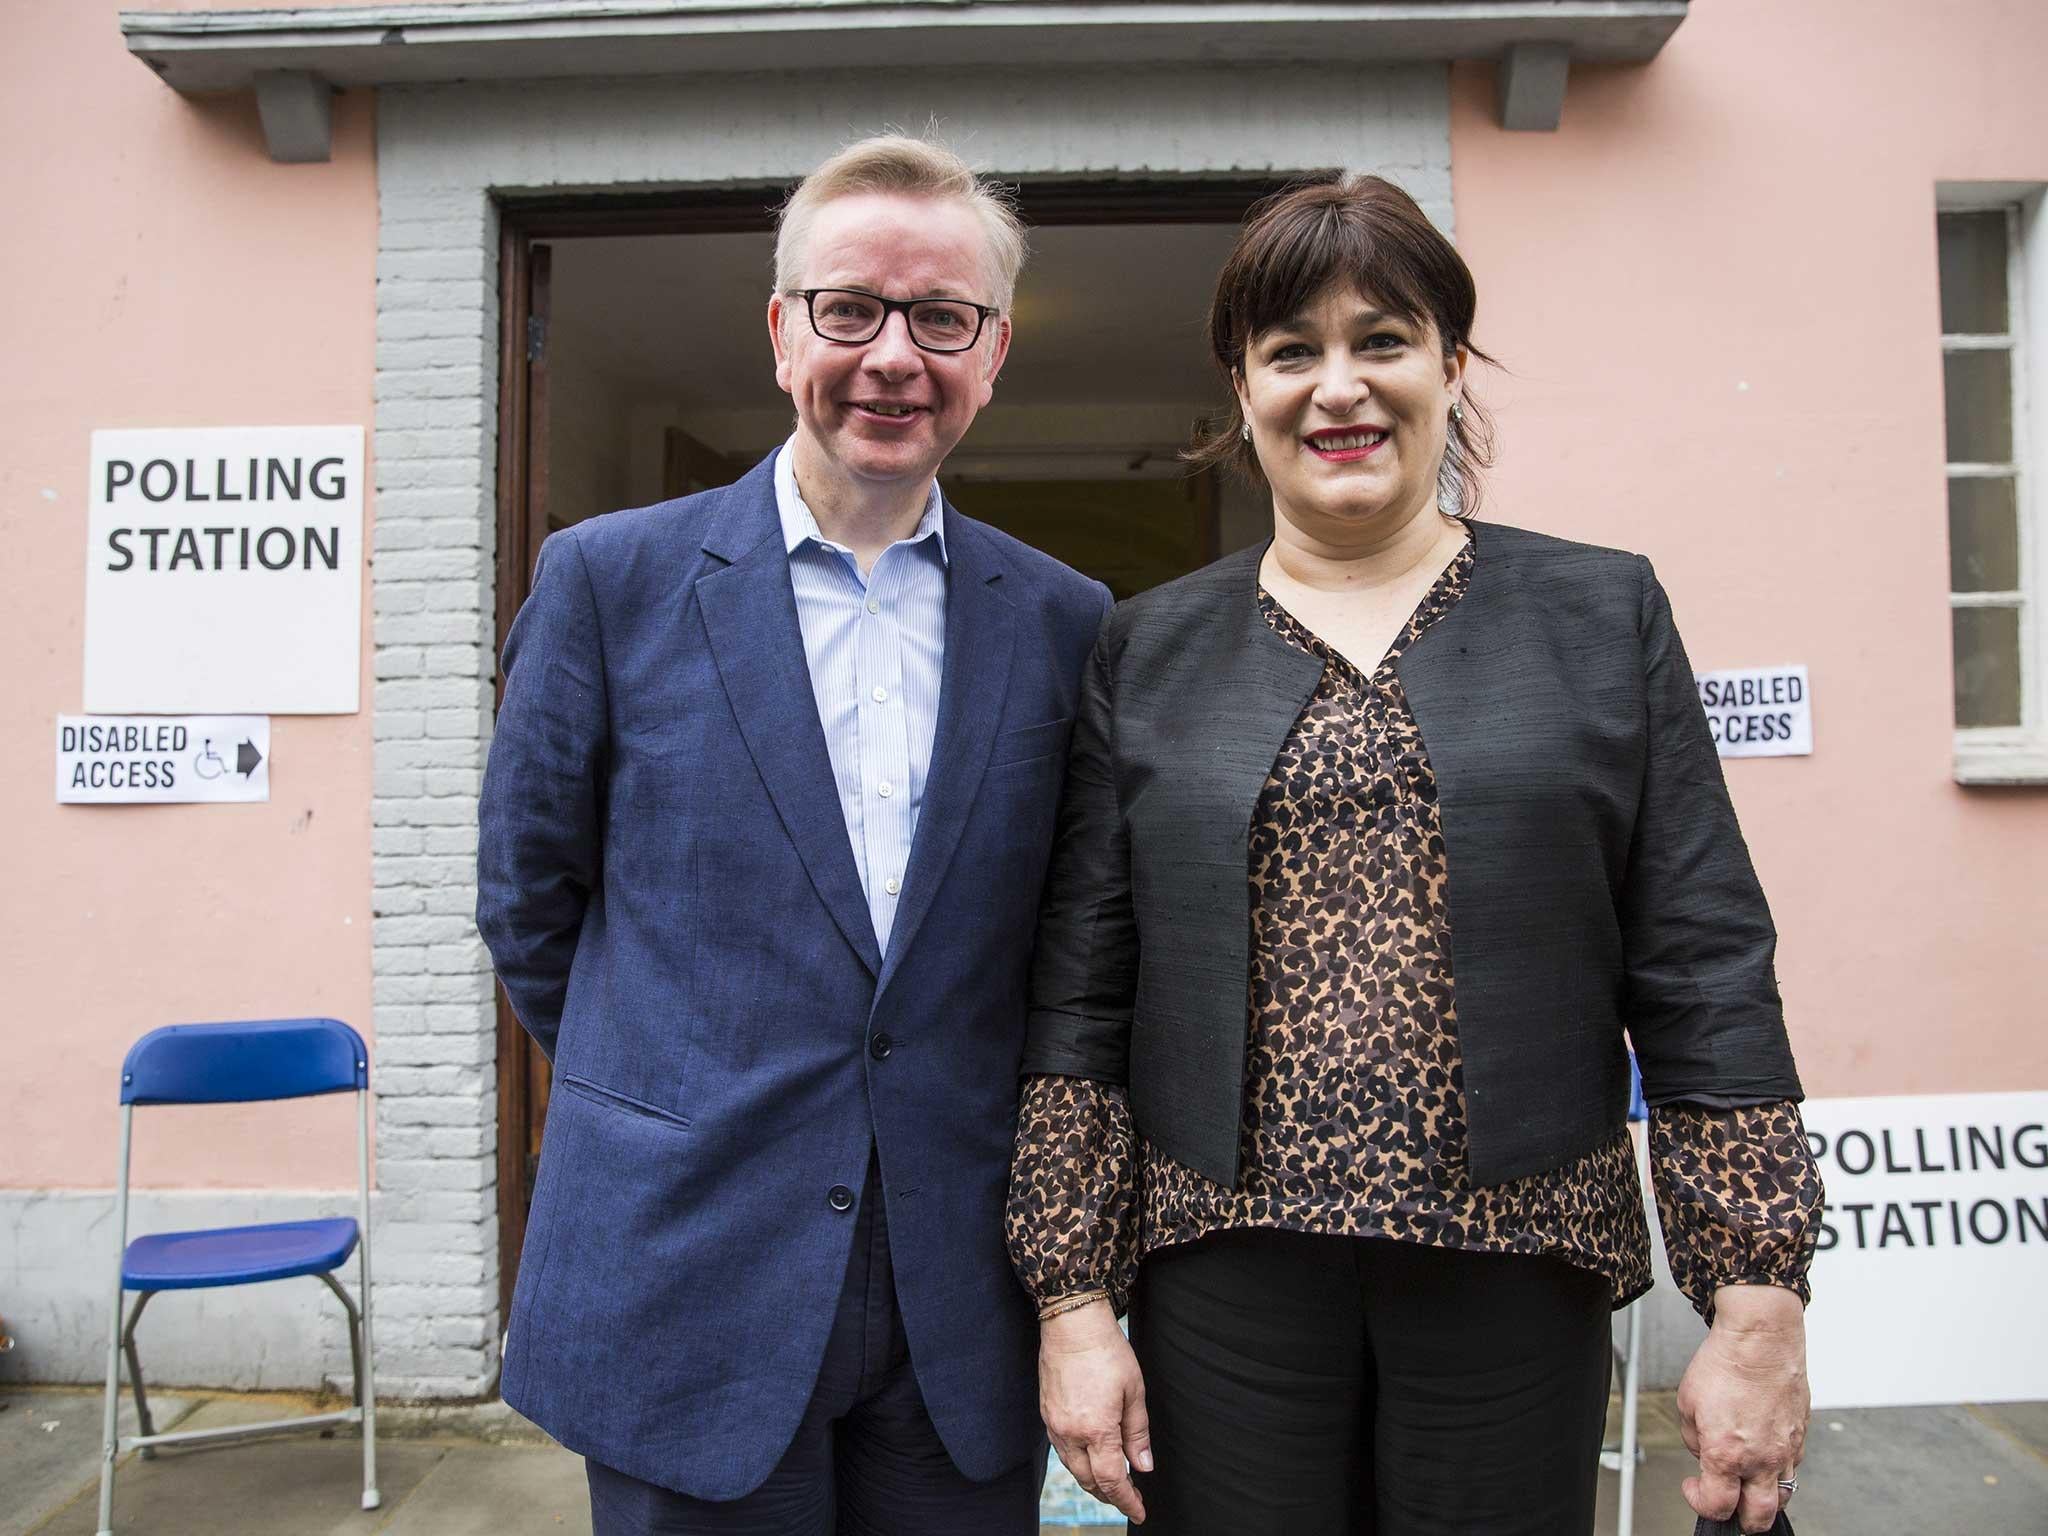 Michael Gove and Sarah Vine at a polling station (Getty Images)